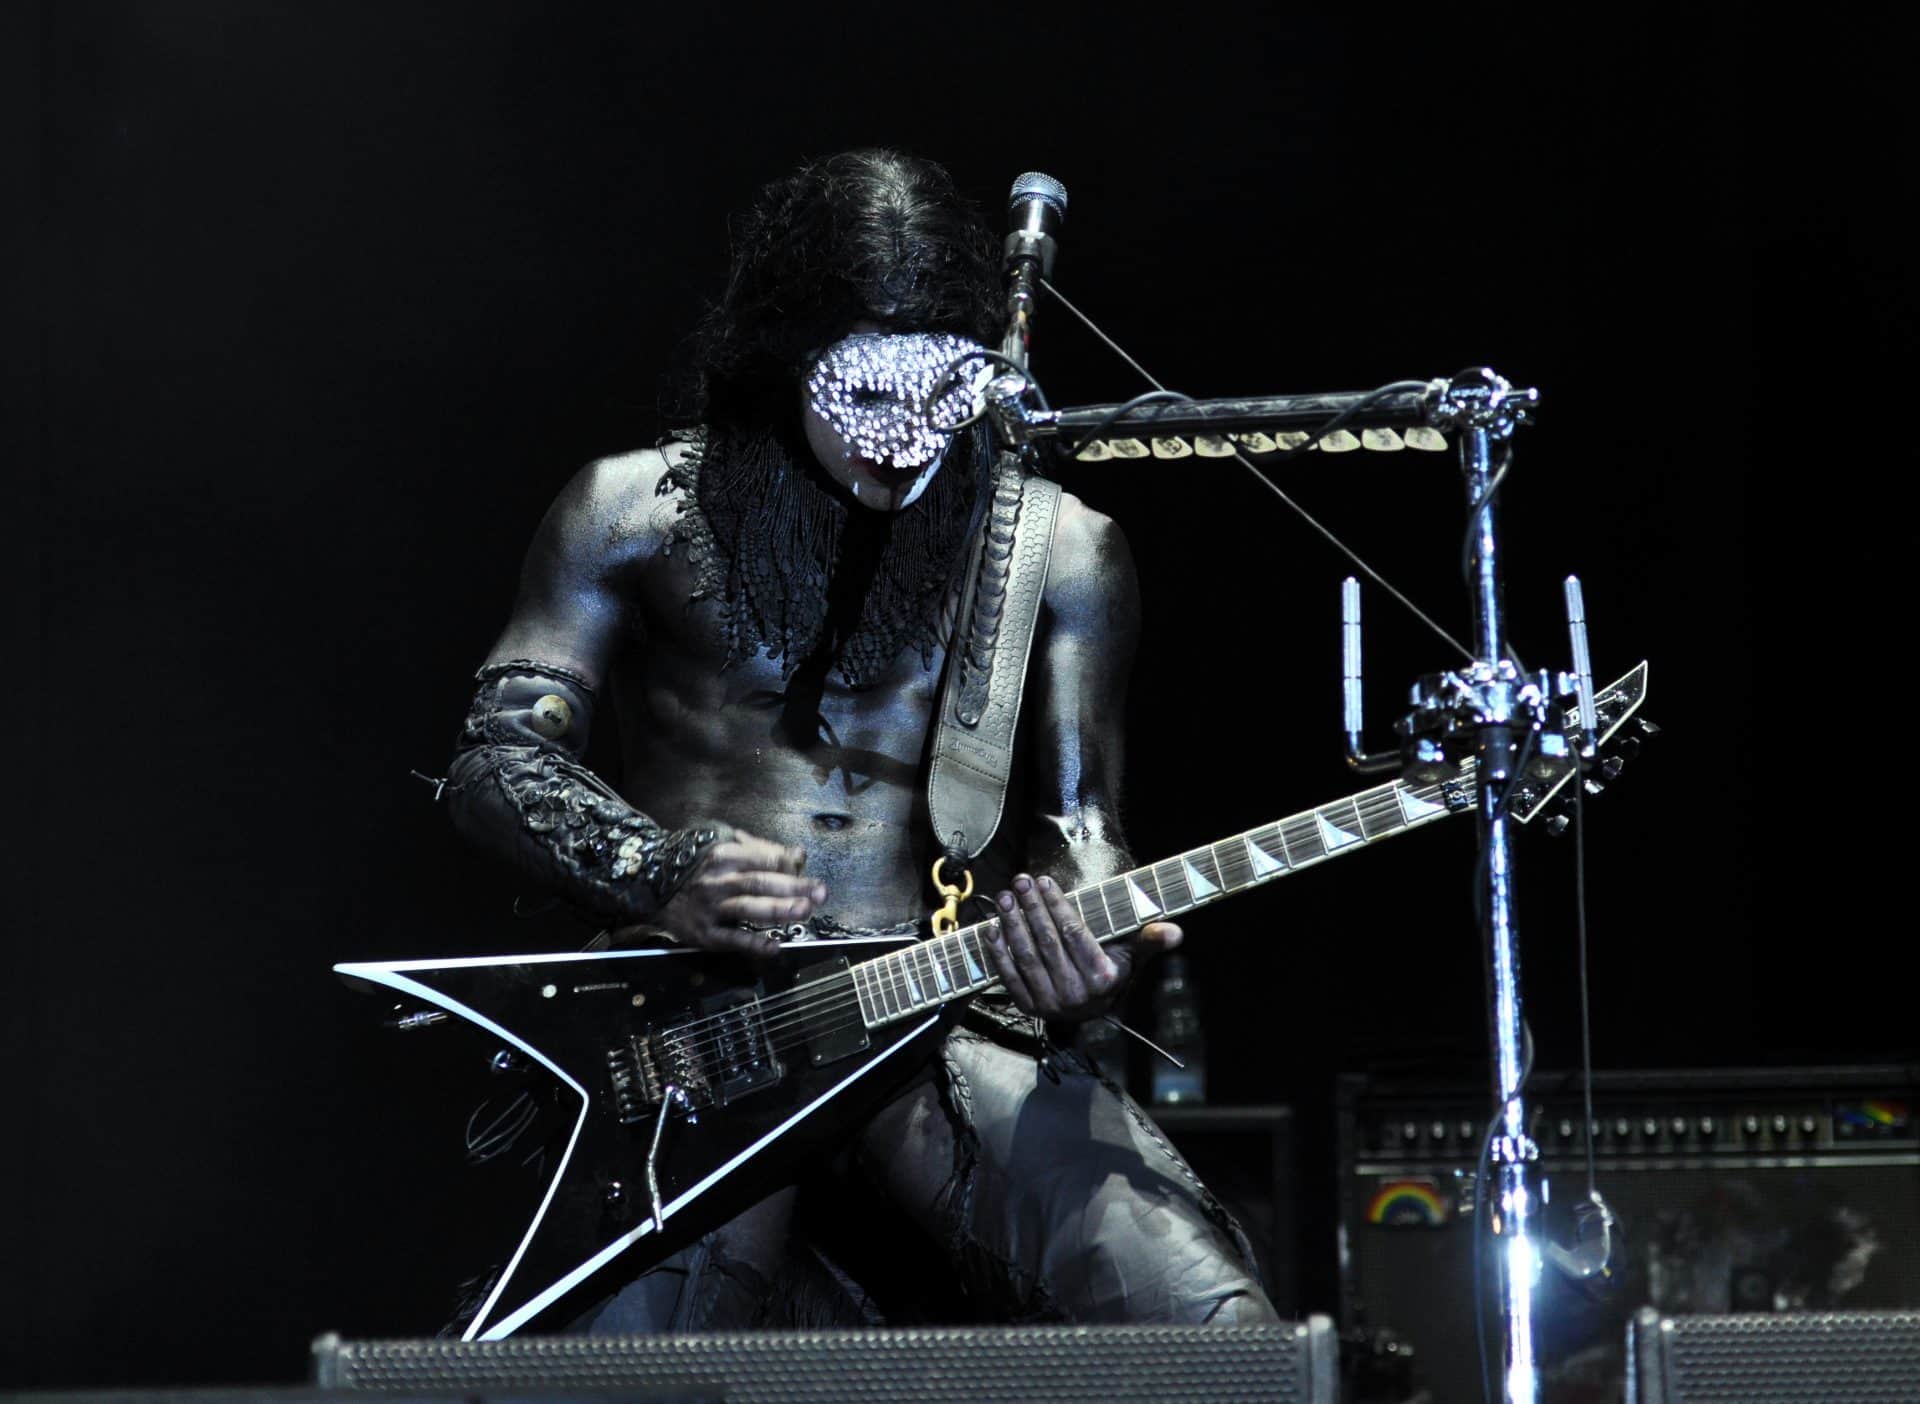 What You Can Learn From Wes Borland's Guitar Style